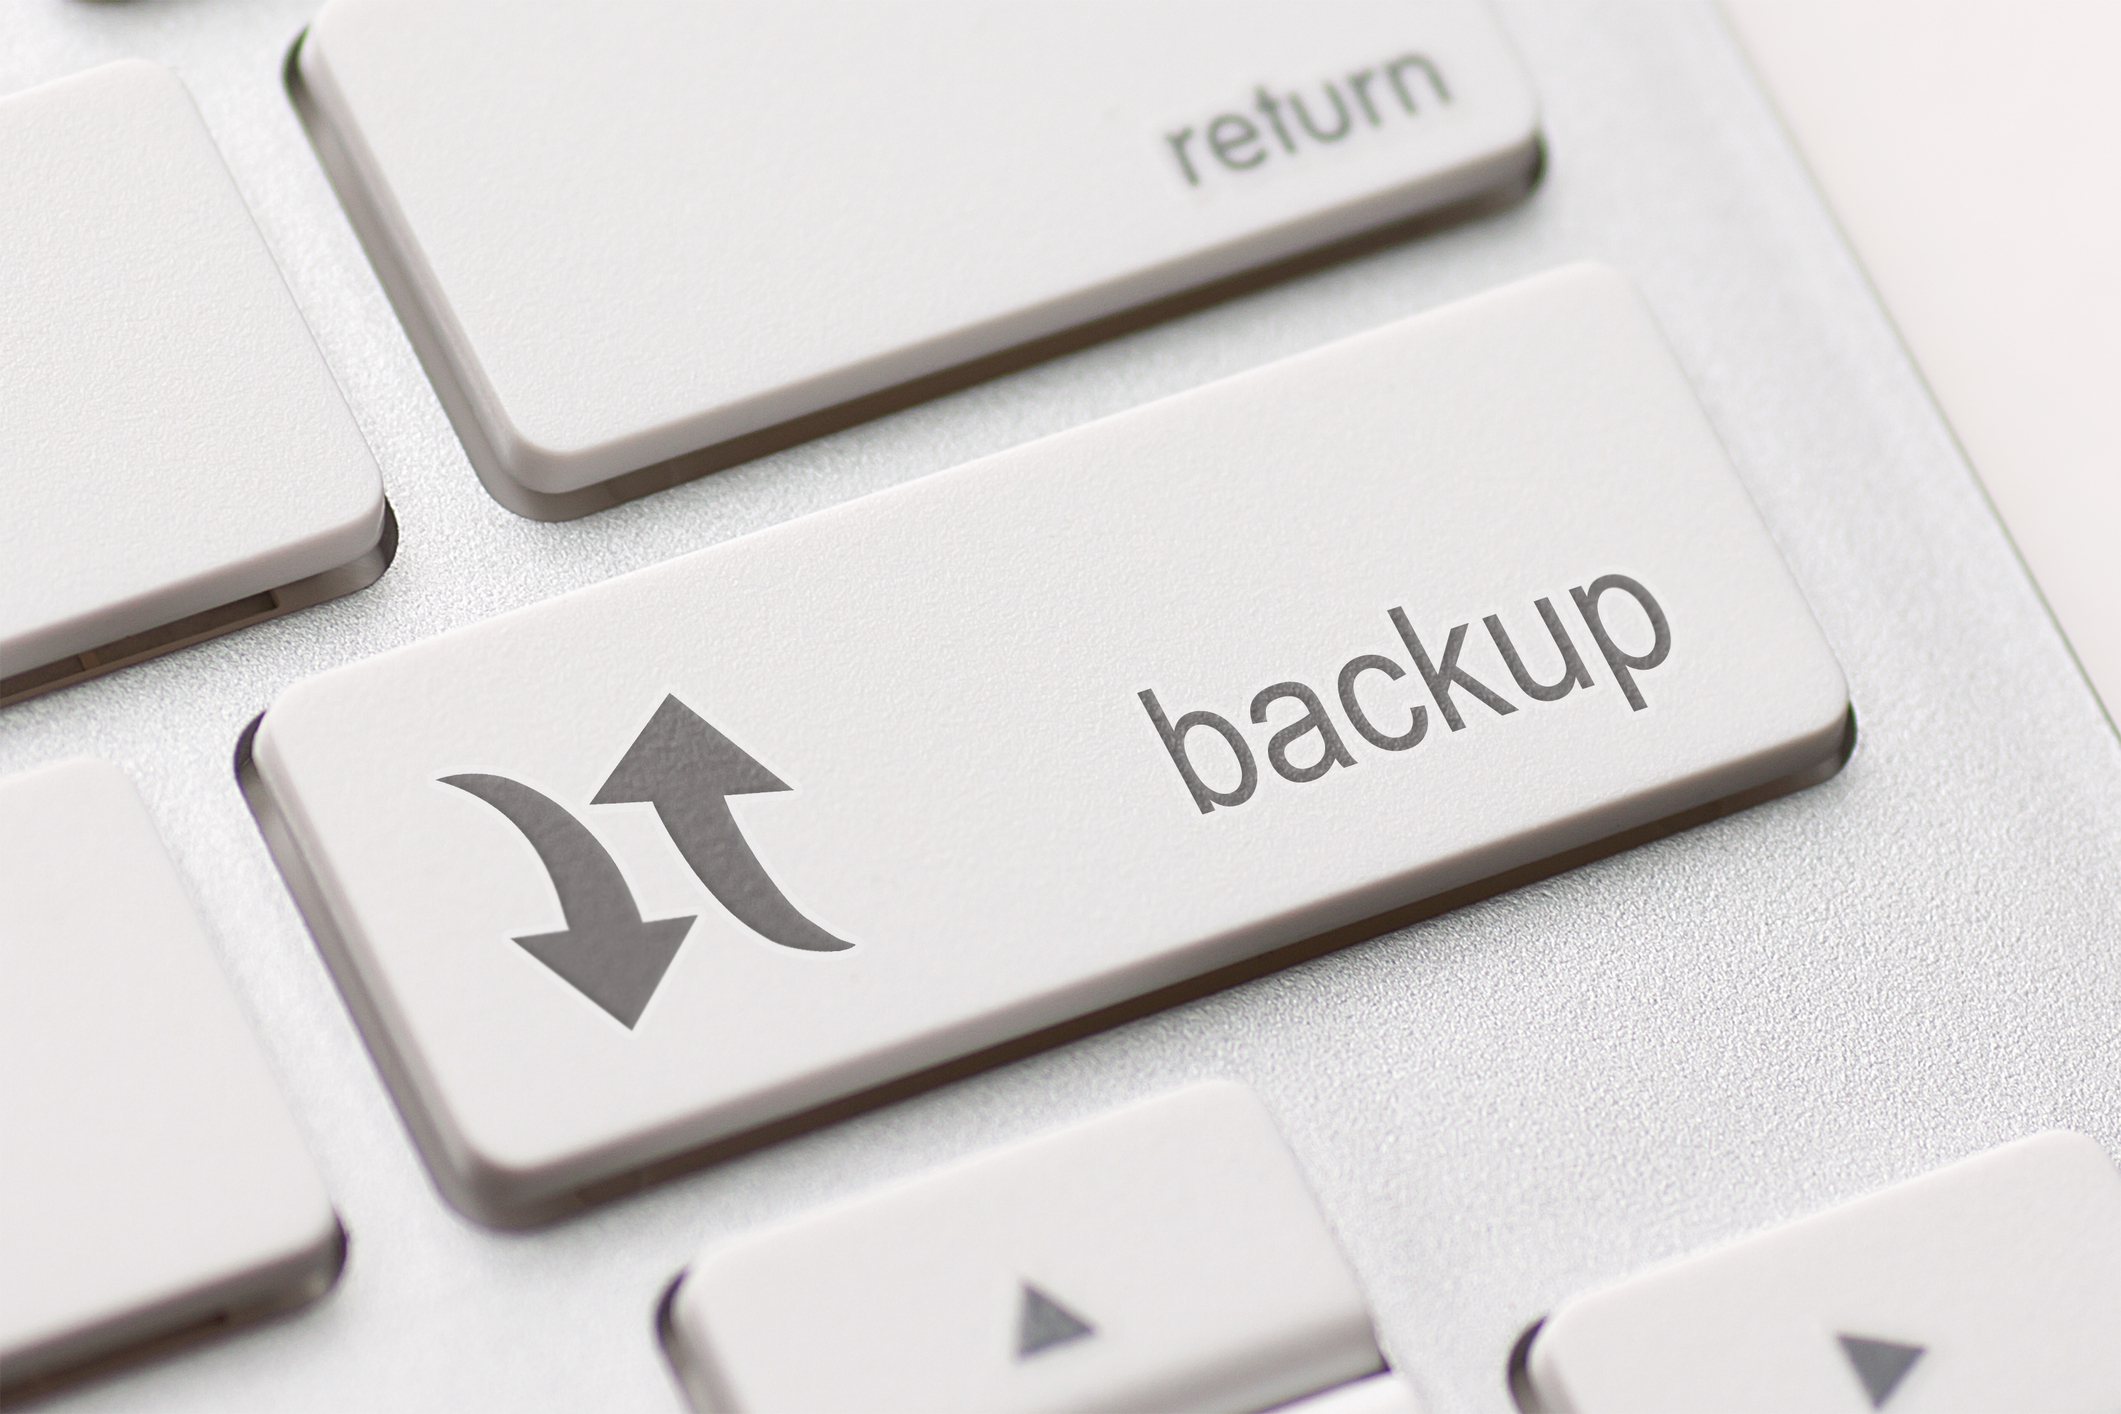 Incorrect Backups? You’ll Pay for That Mistake